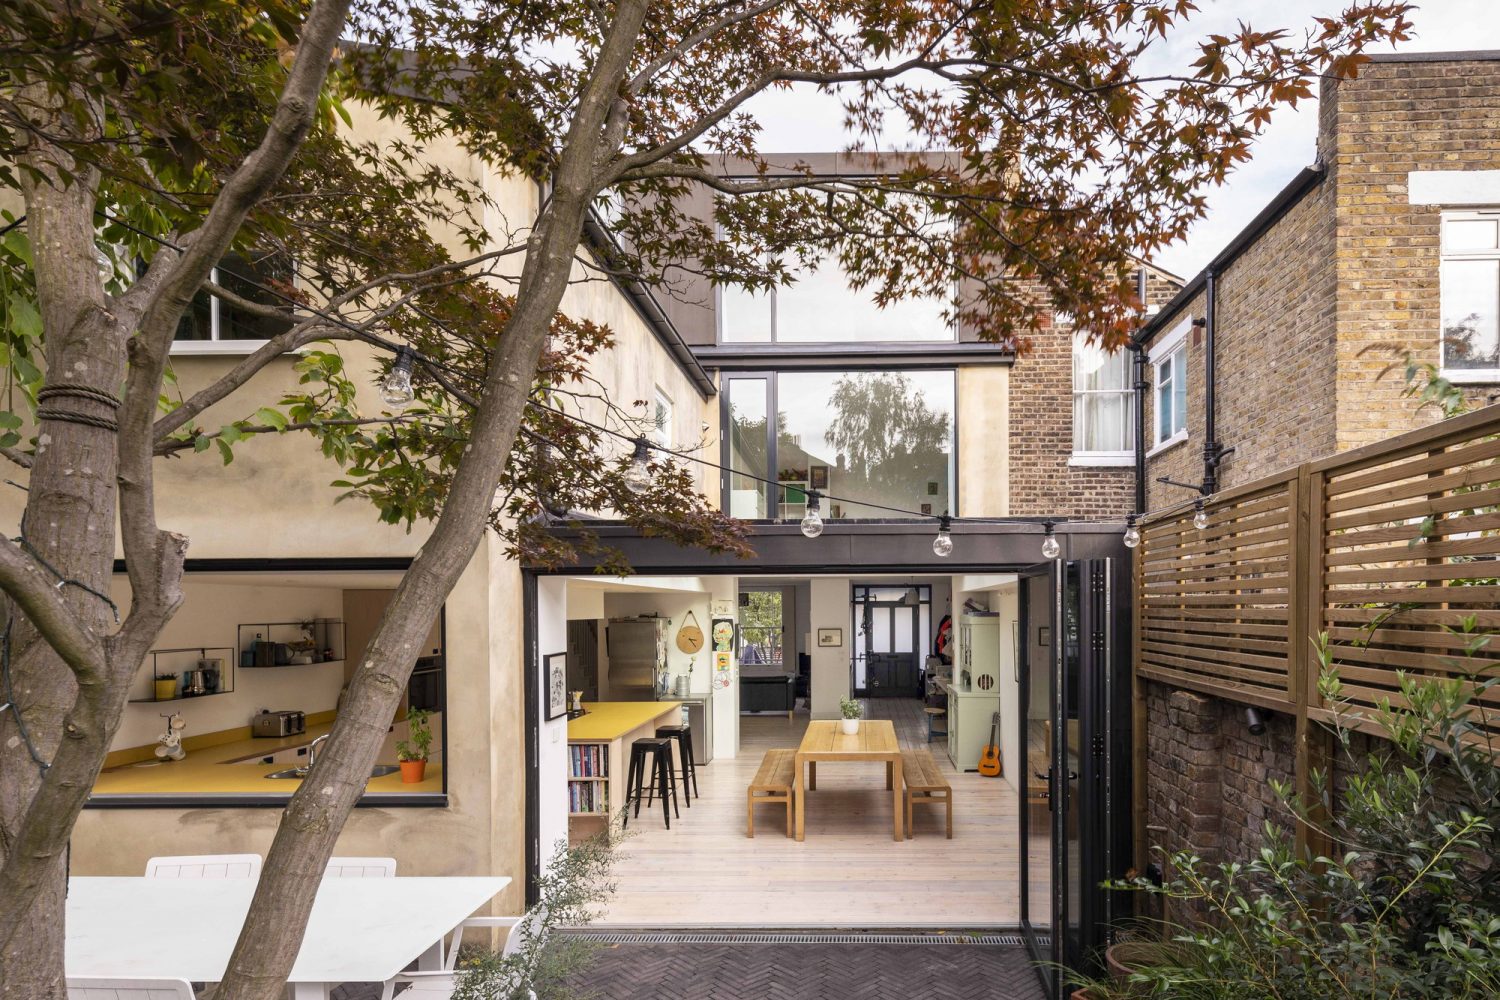 The Coach House | Terraced House Renovation by Studio 30 Architects